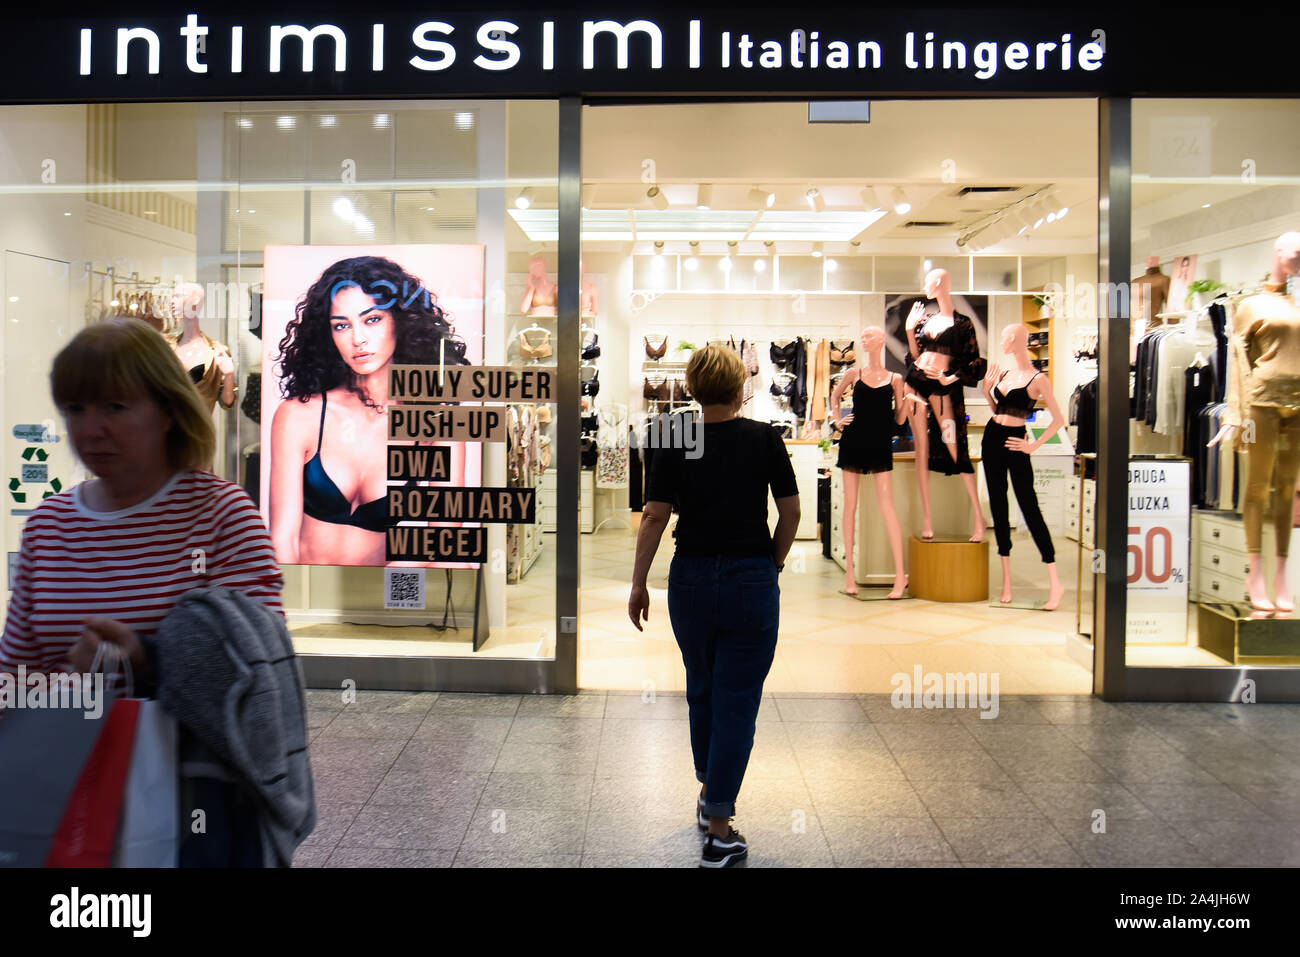 Intimissimi High Resolution Stock Photography and Images - Alamy